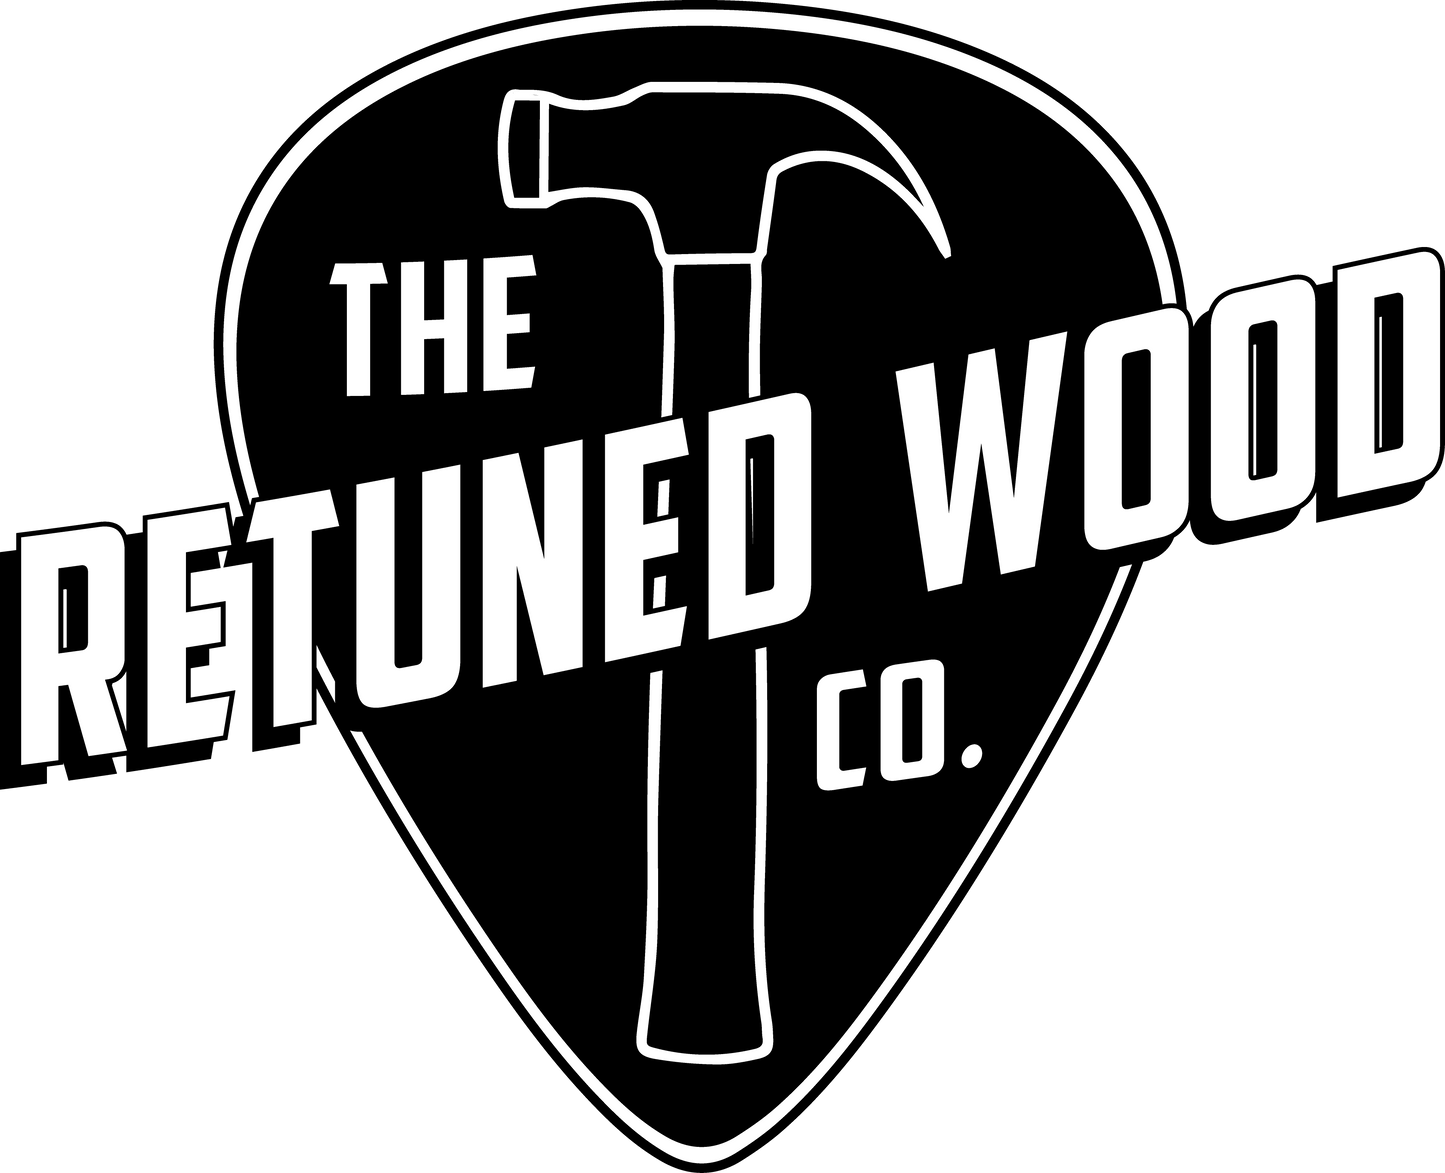 The Retuned Wood Co. Gift Voucher